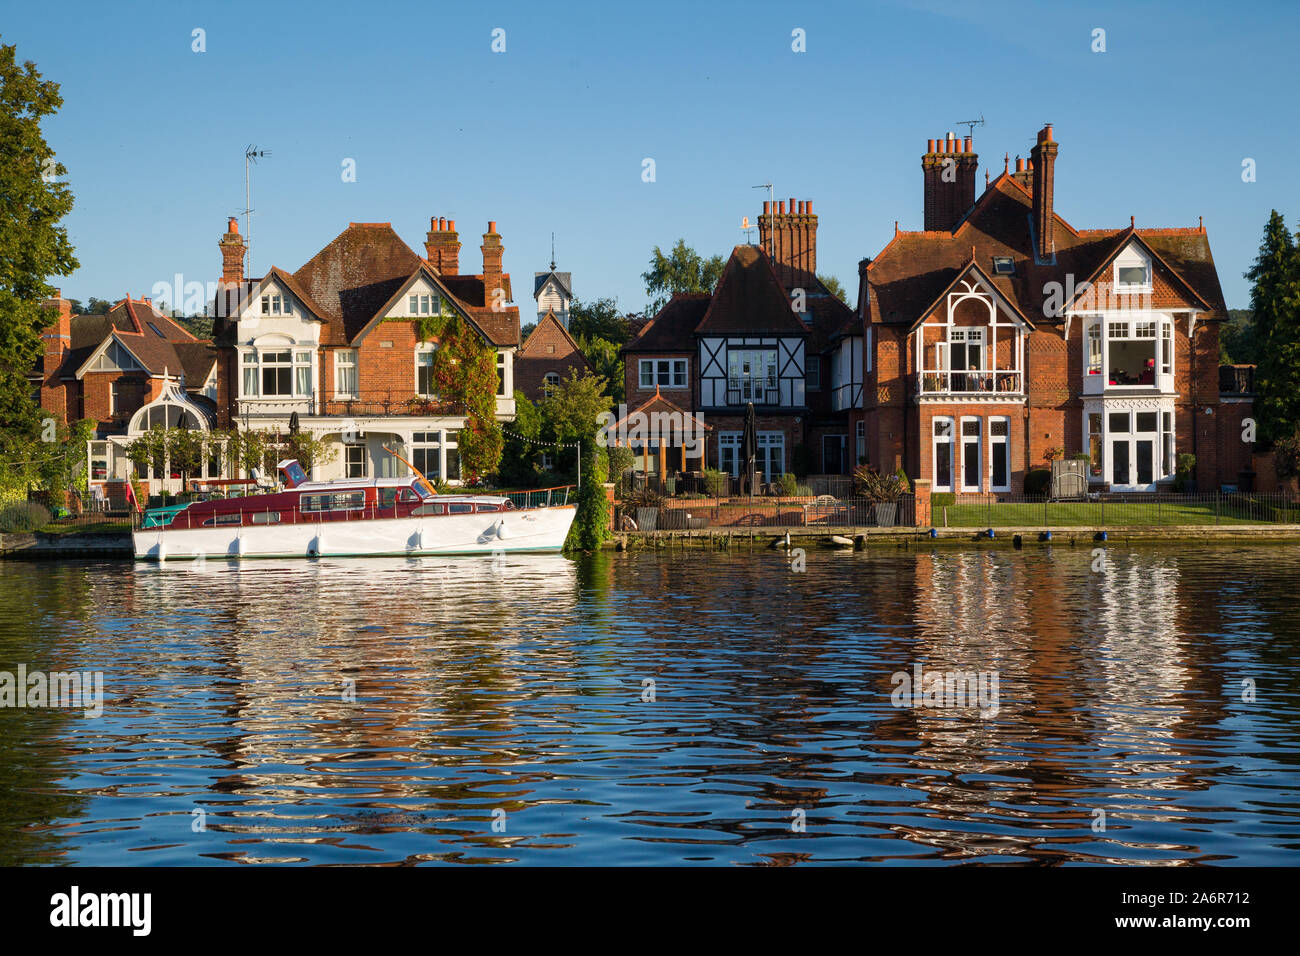 Large private residential Edwardian Villas and a classic period cabin cruiser on the Thames at Marlow, Buckinghamshire Stock Photo